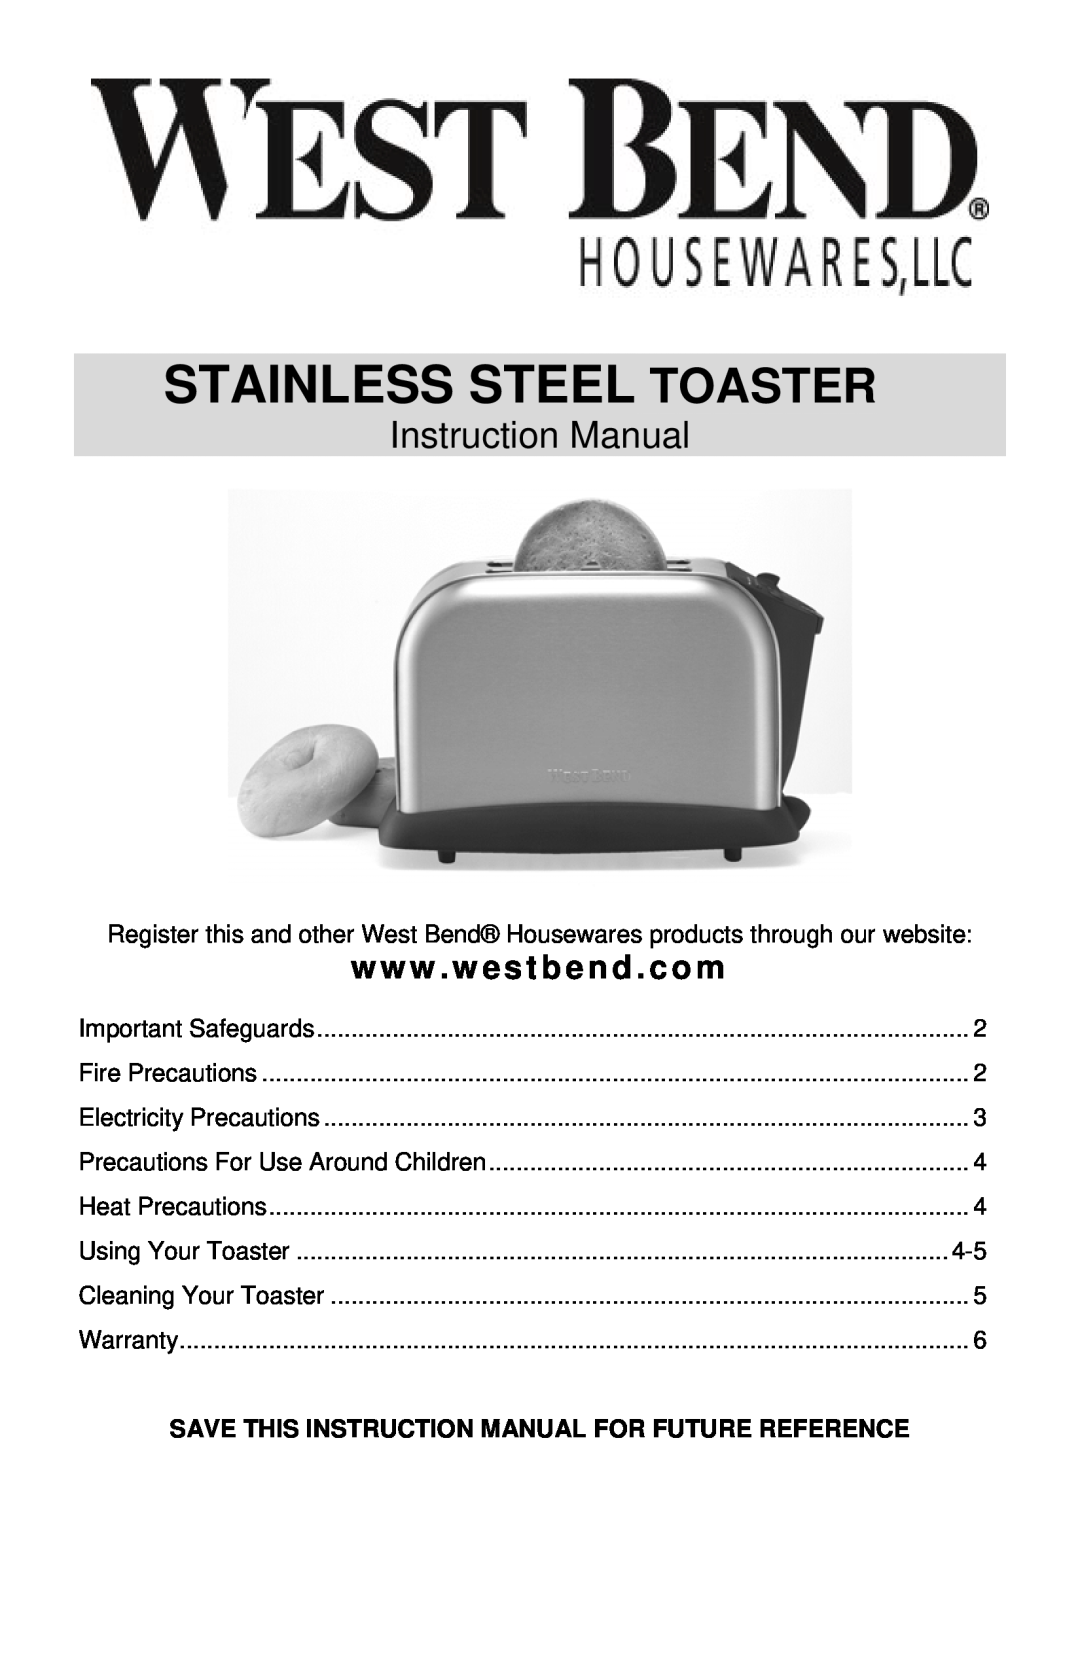 West Bend STAINLESS STEEL TOASTER instruction manual Stainless Steel Toaster, www . westbend . com 